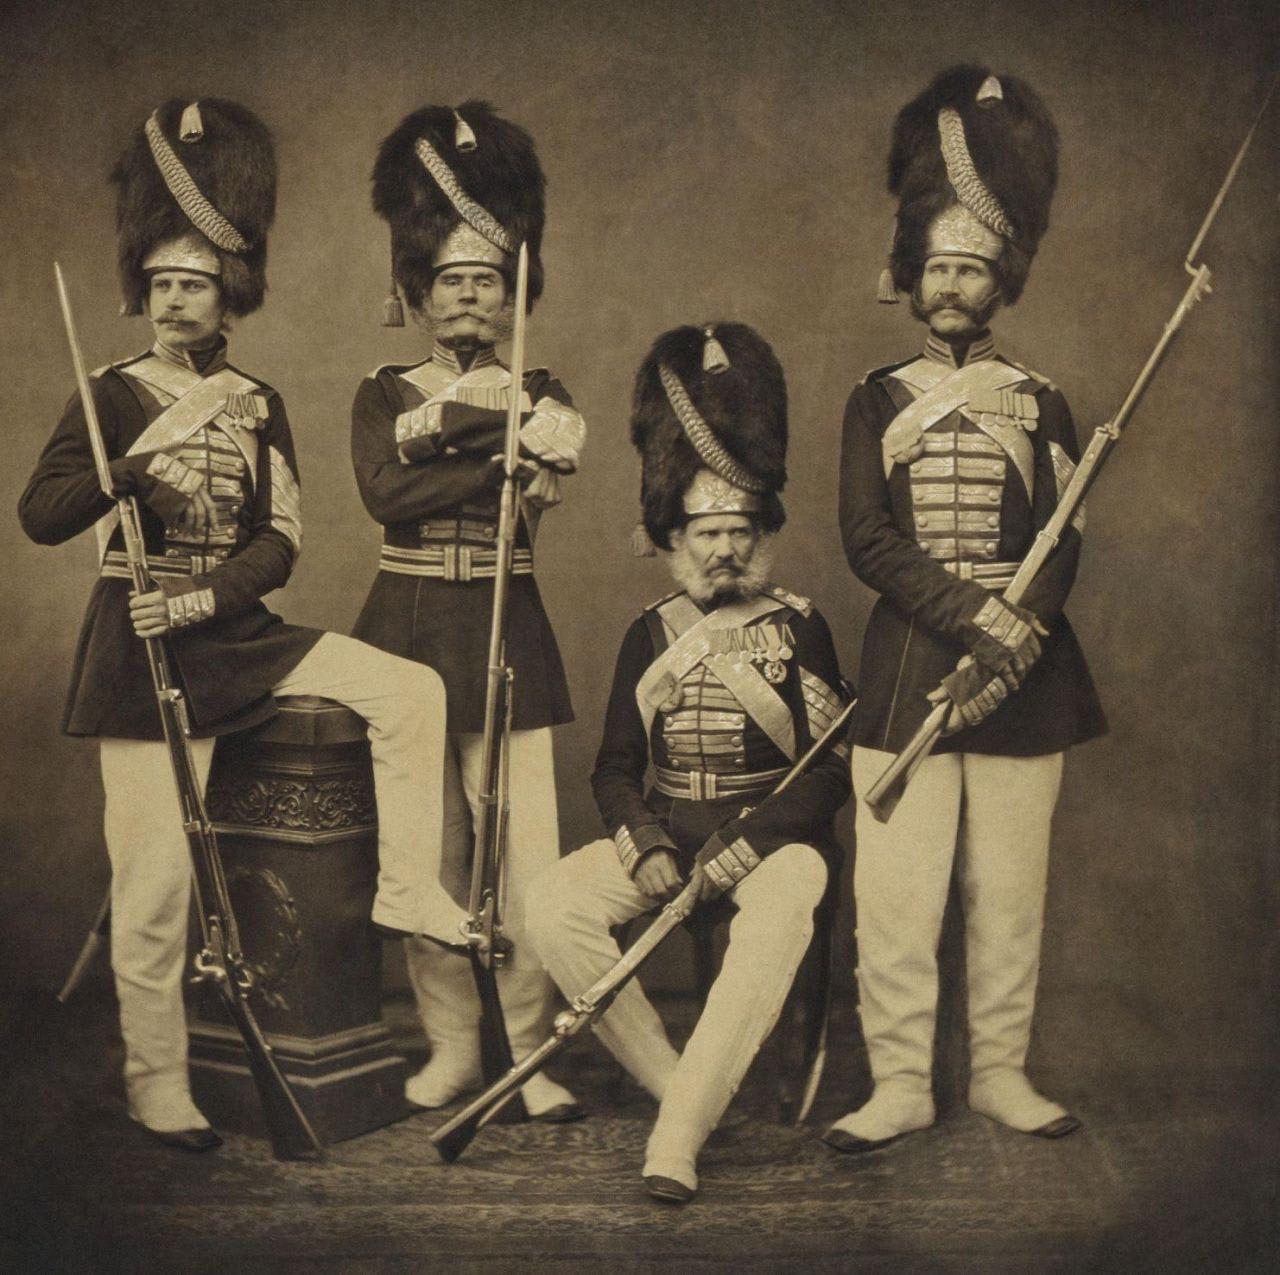 Portrait of a group of Palace Grenadiers, 1870s-1880s, Russia.